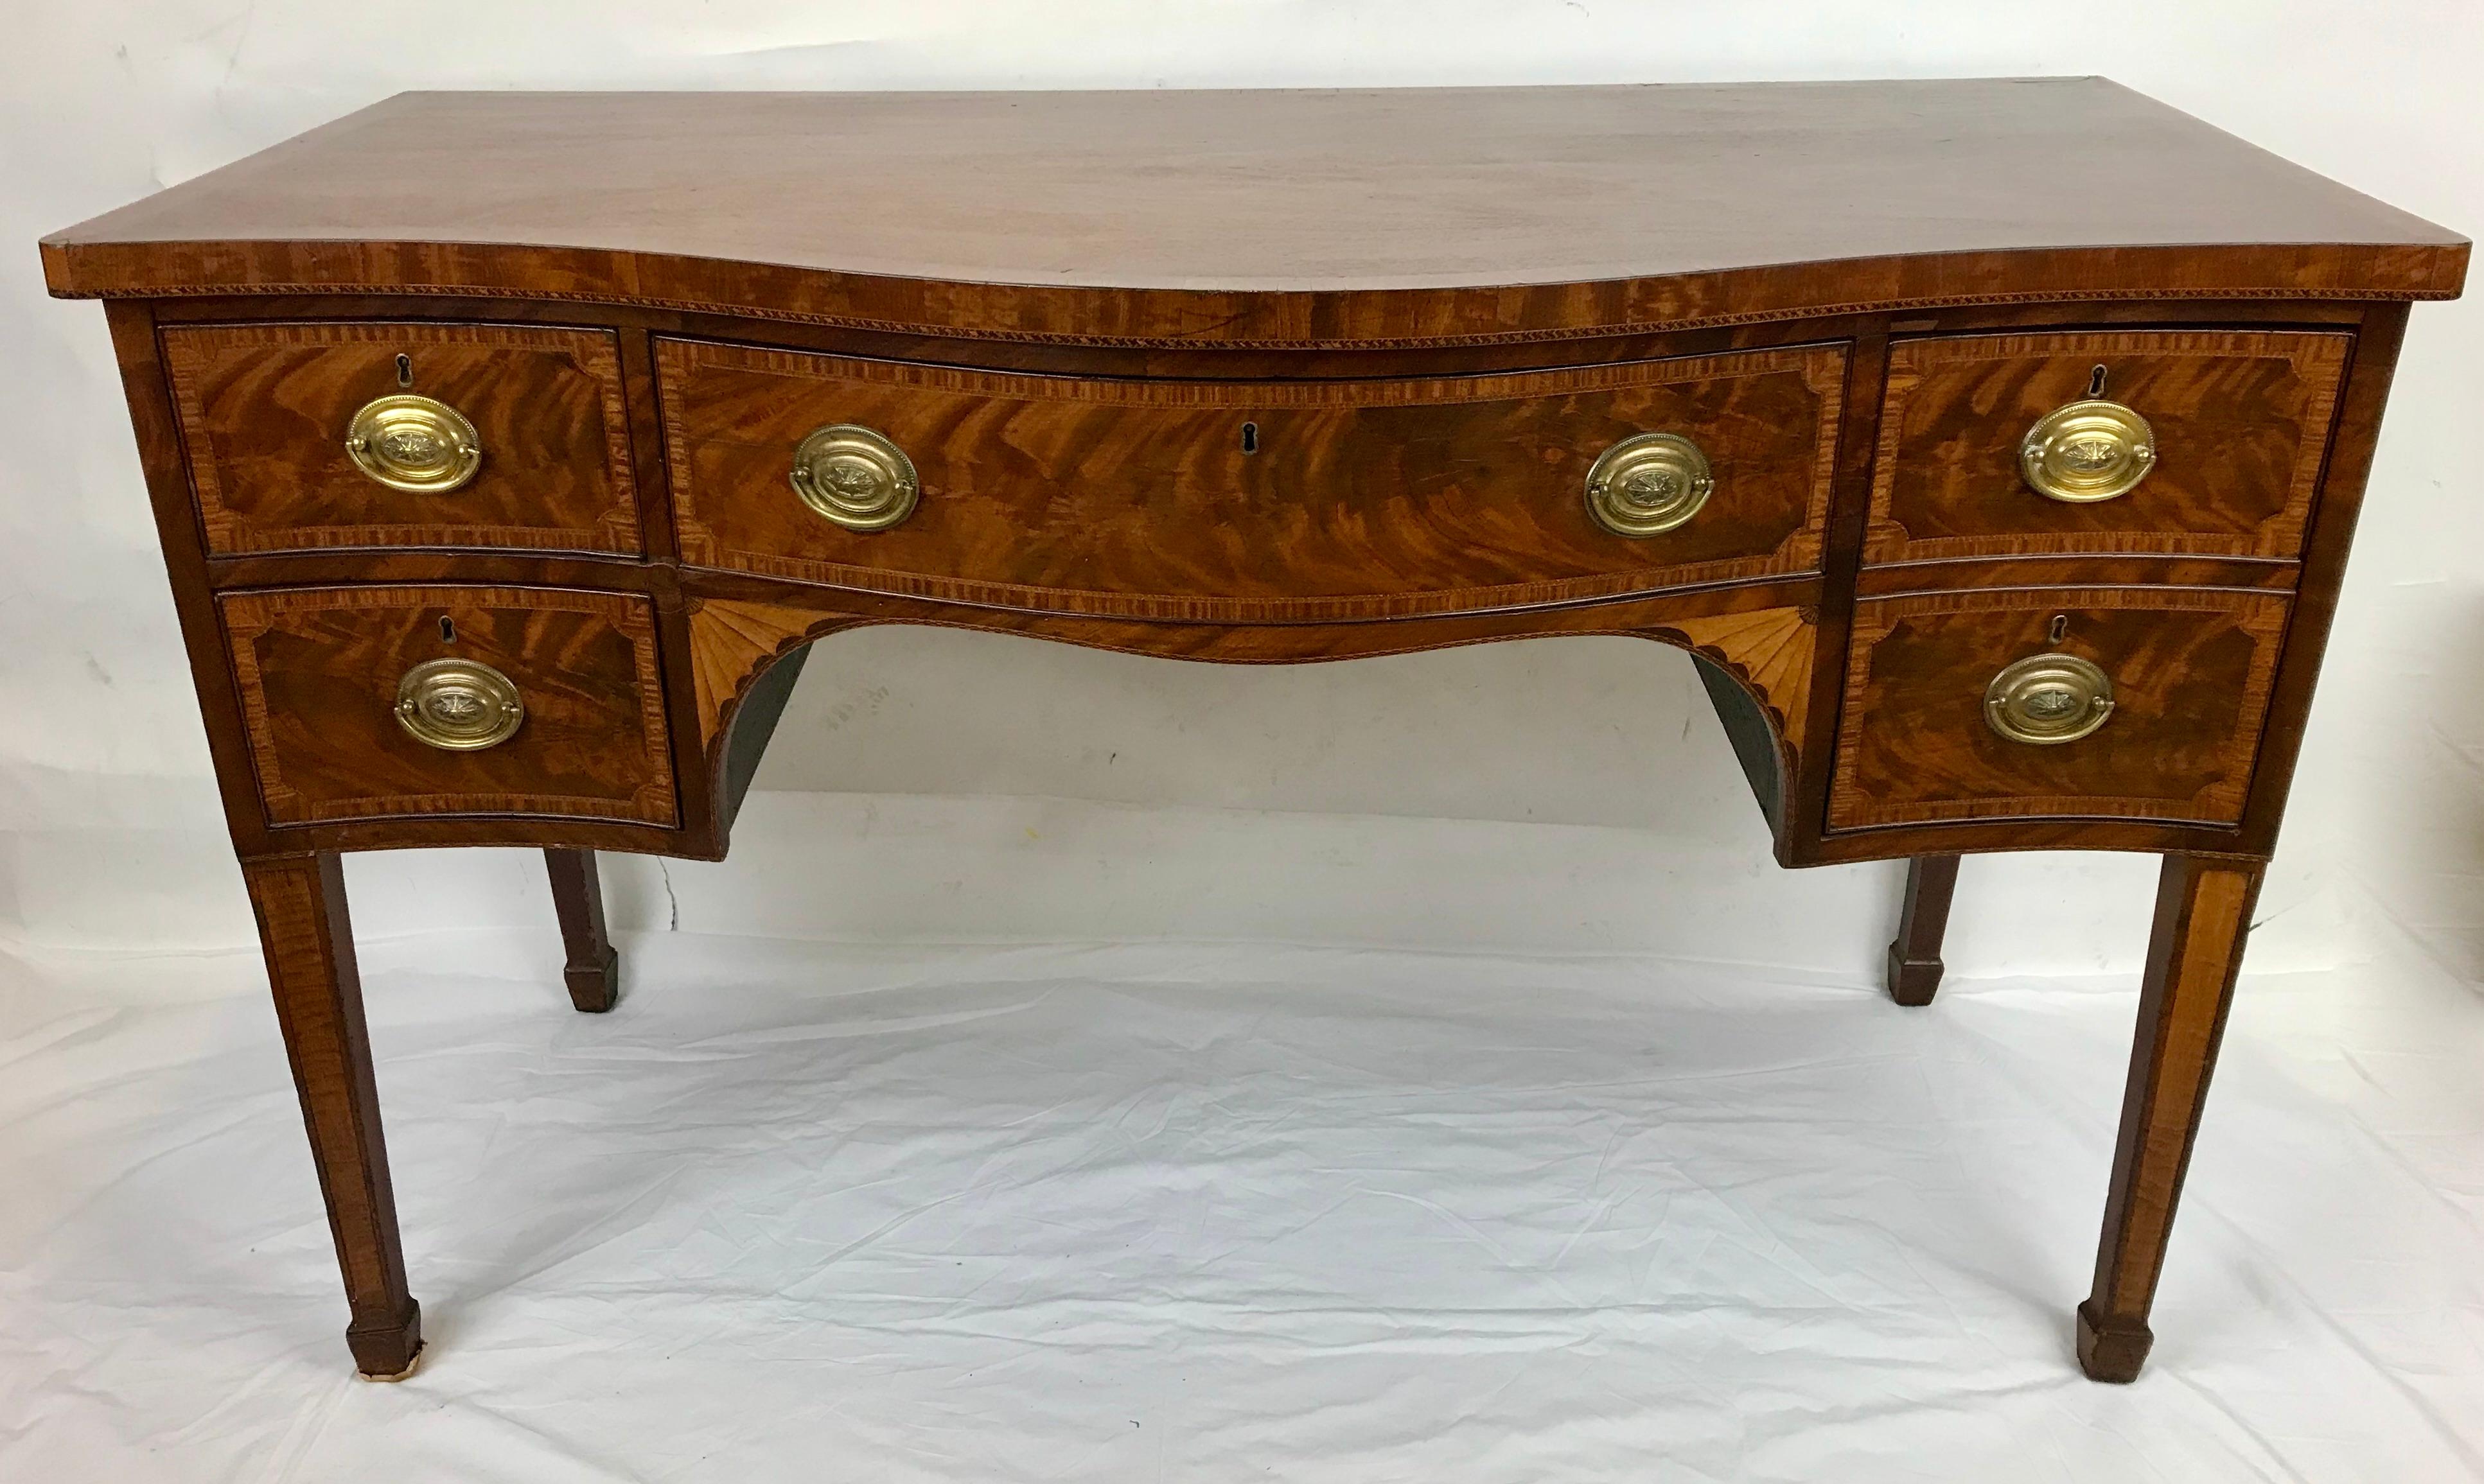 This Georgian serpentine sideboard features fine inlays, banding and cross banding. It is in wonderful condition, with beautifully colored flame mahogany panels, and a fine old finish.